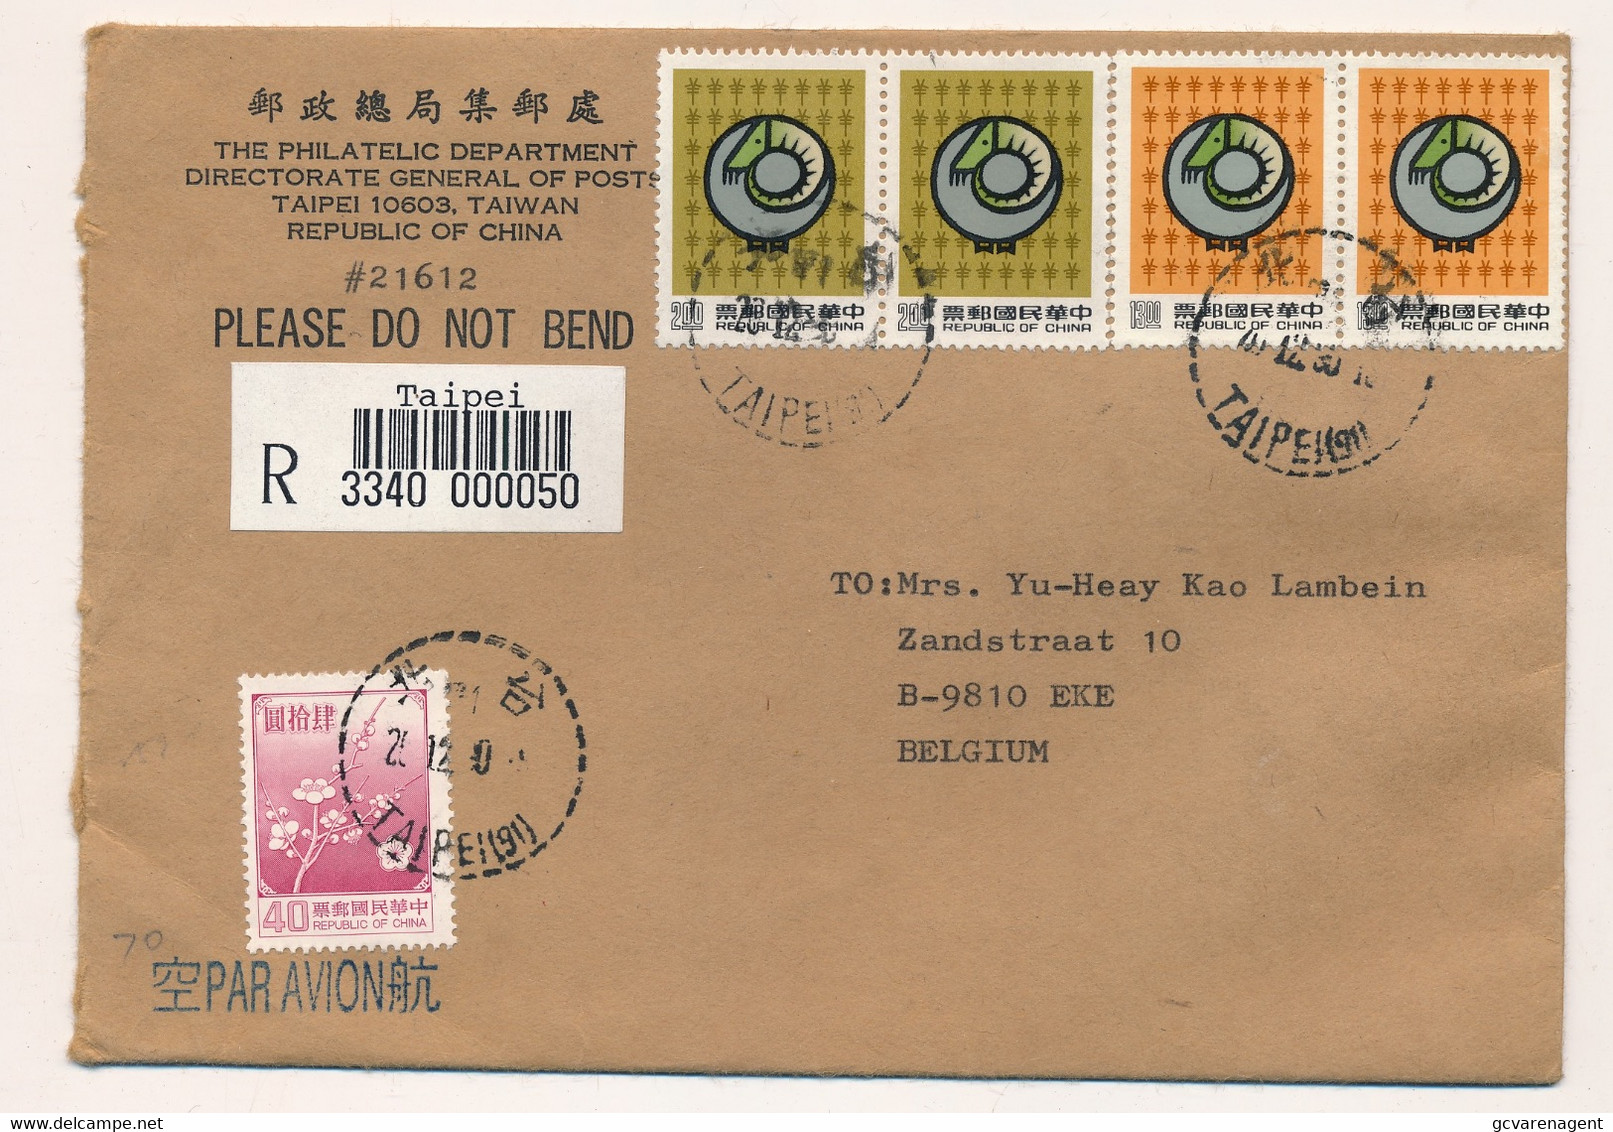 TAIWAN REPUBLIC OF CHINA     RECOMMANDE  TAIPEI - Lettres & Documents